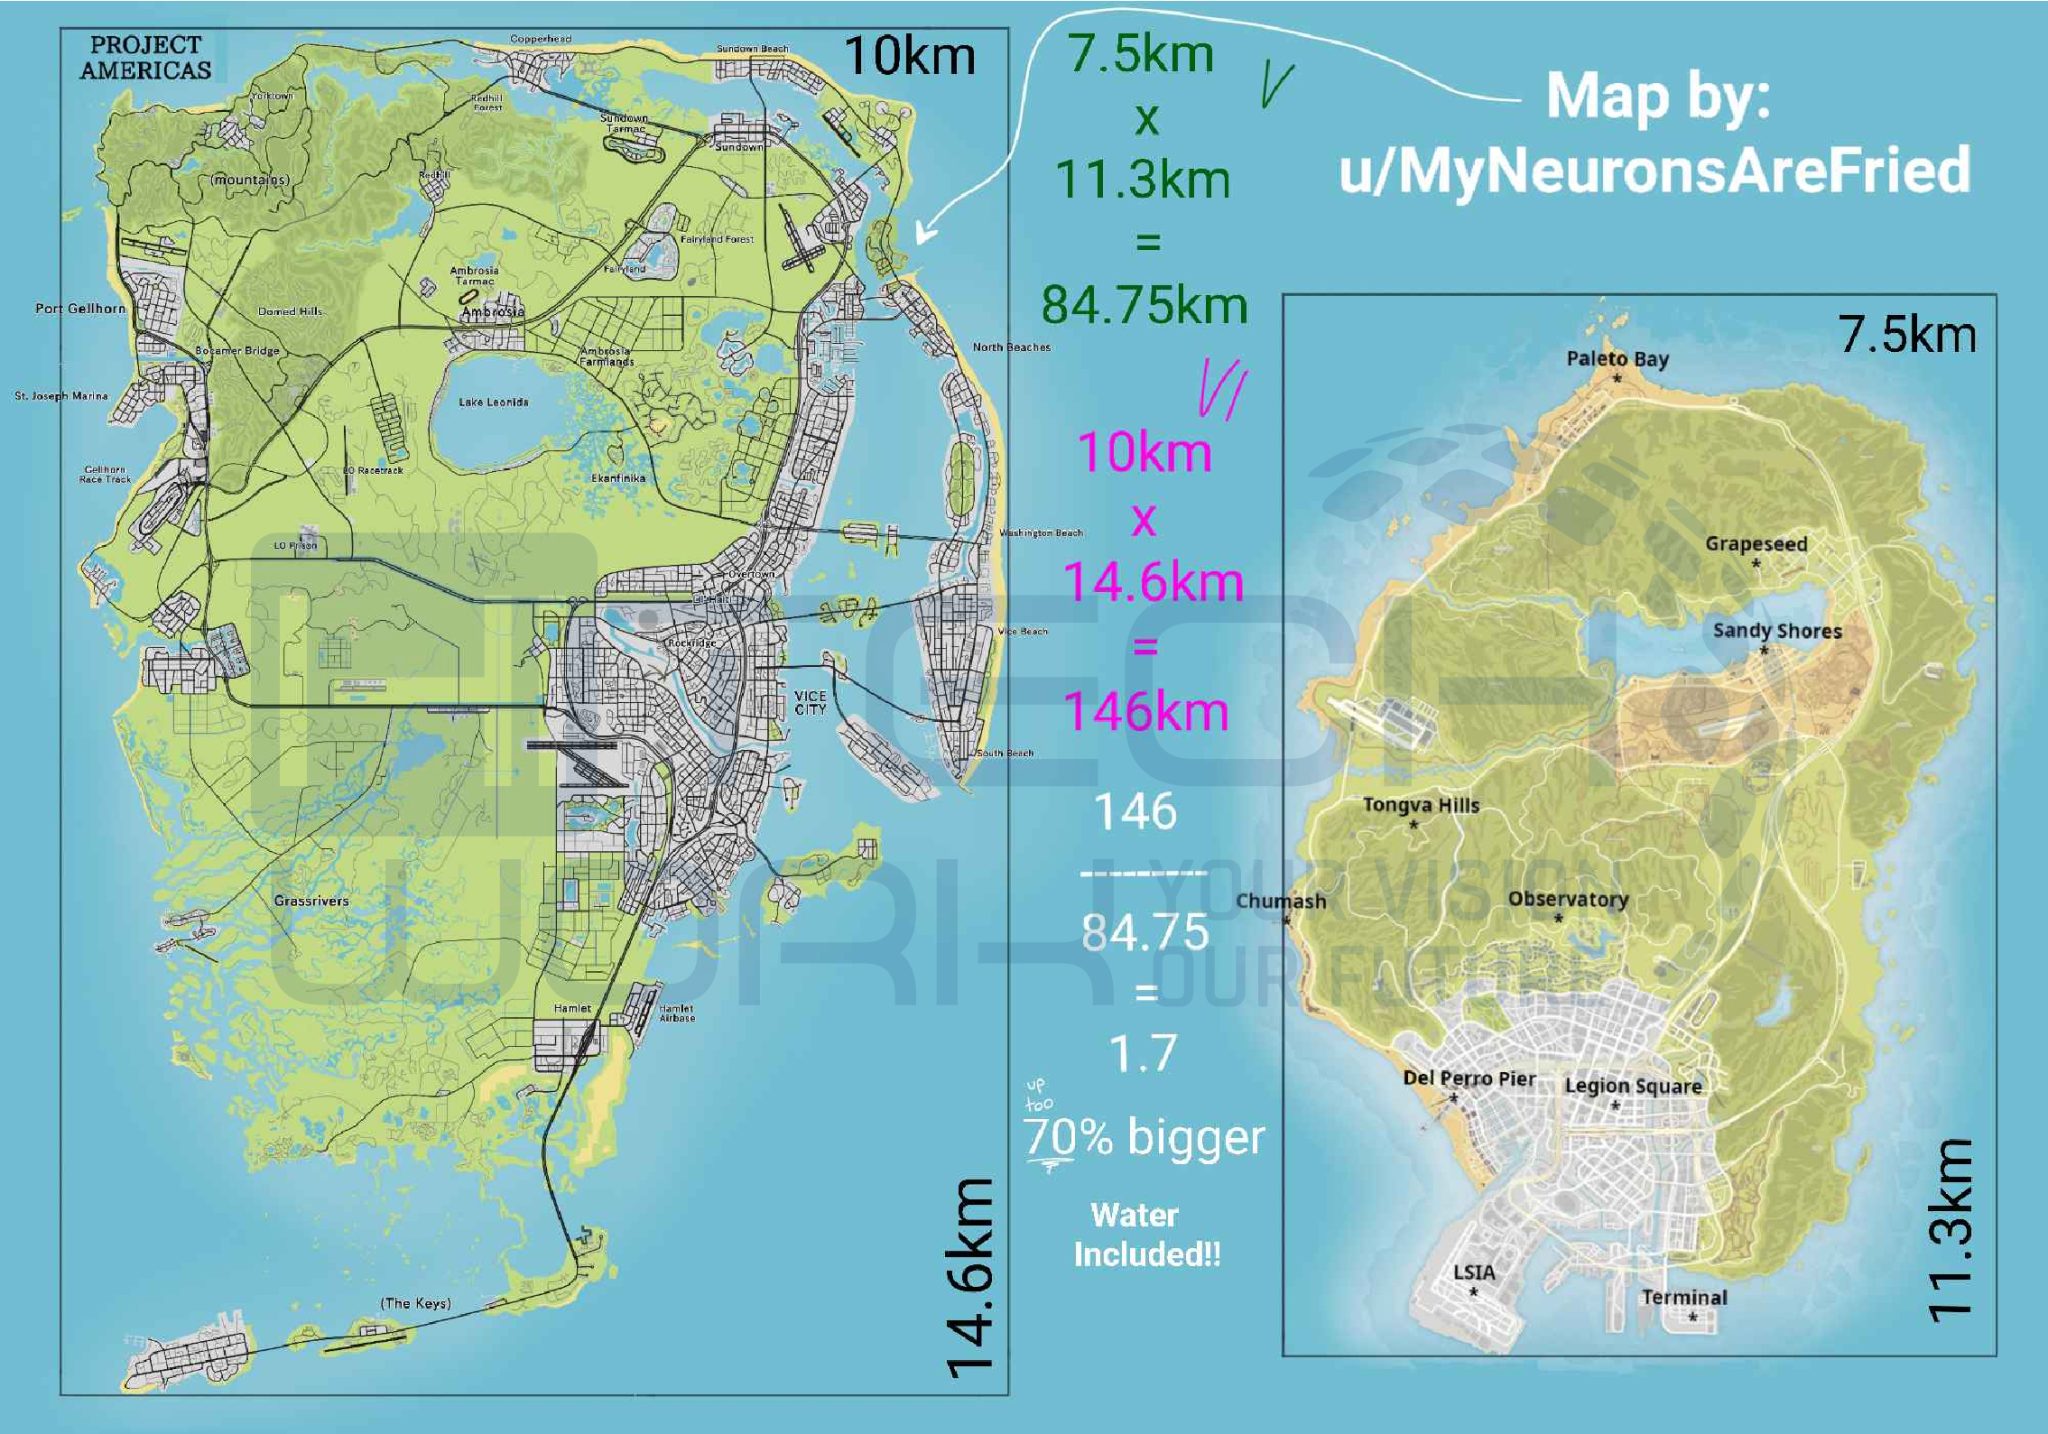 Gta 6 Map And Location All Rumors And Leaks Of Releasing Game Hi Tech Work 5960